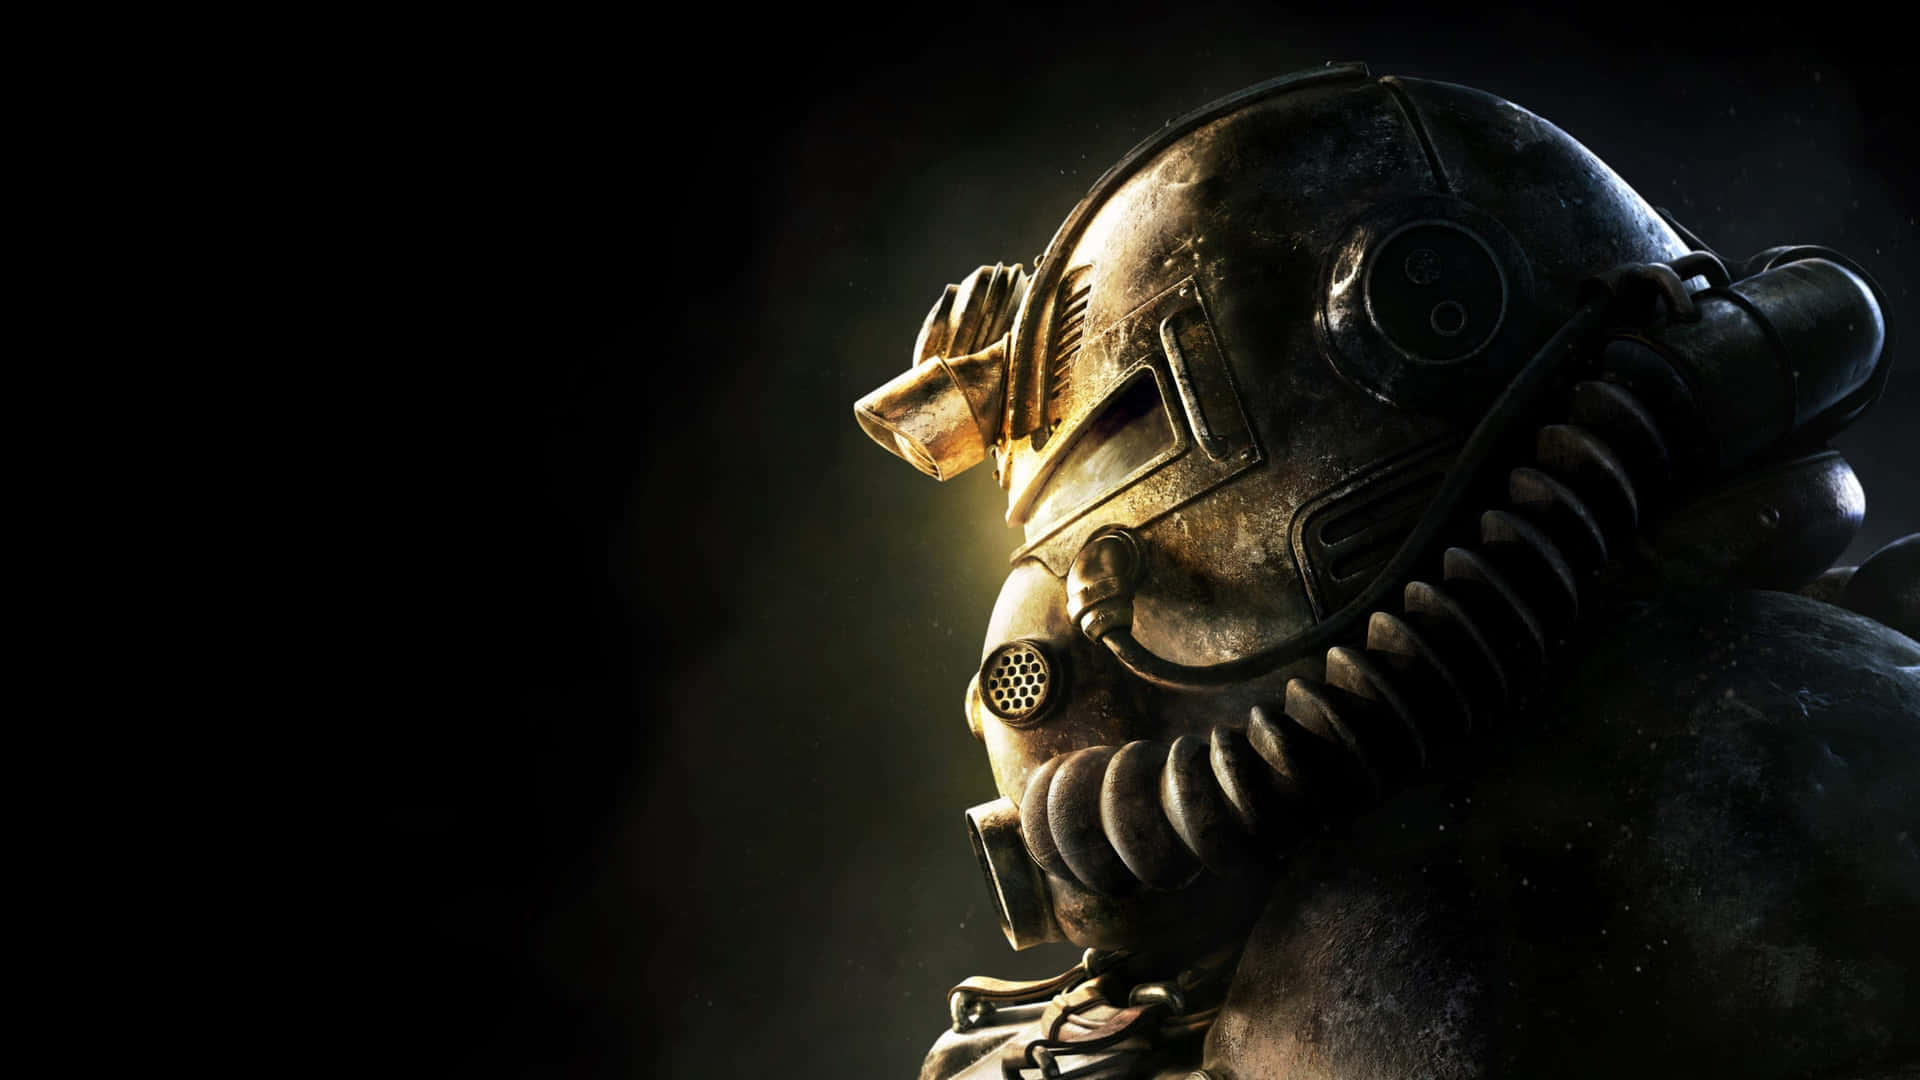 “explore The Post-apocalyptic Wasteland Of Fallout: New Vegas.” Wallpaper